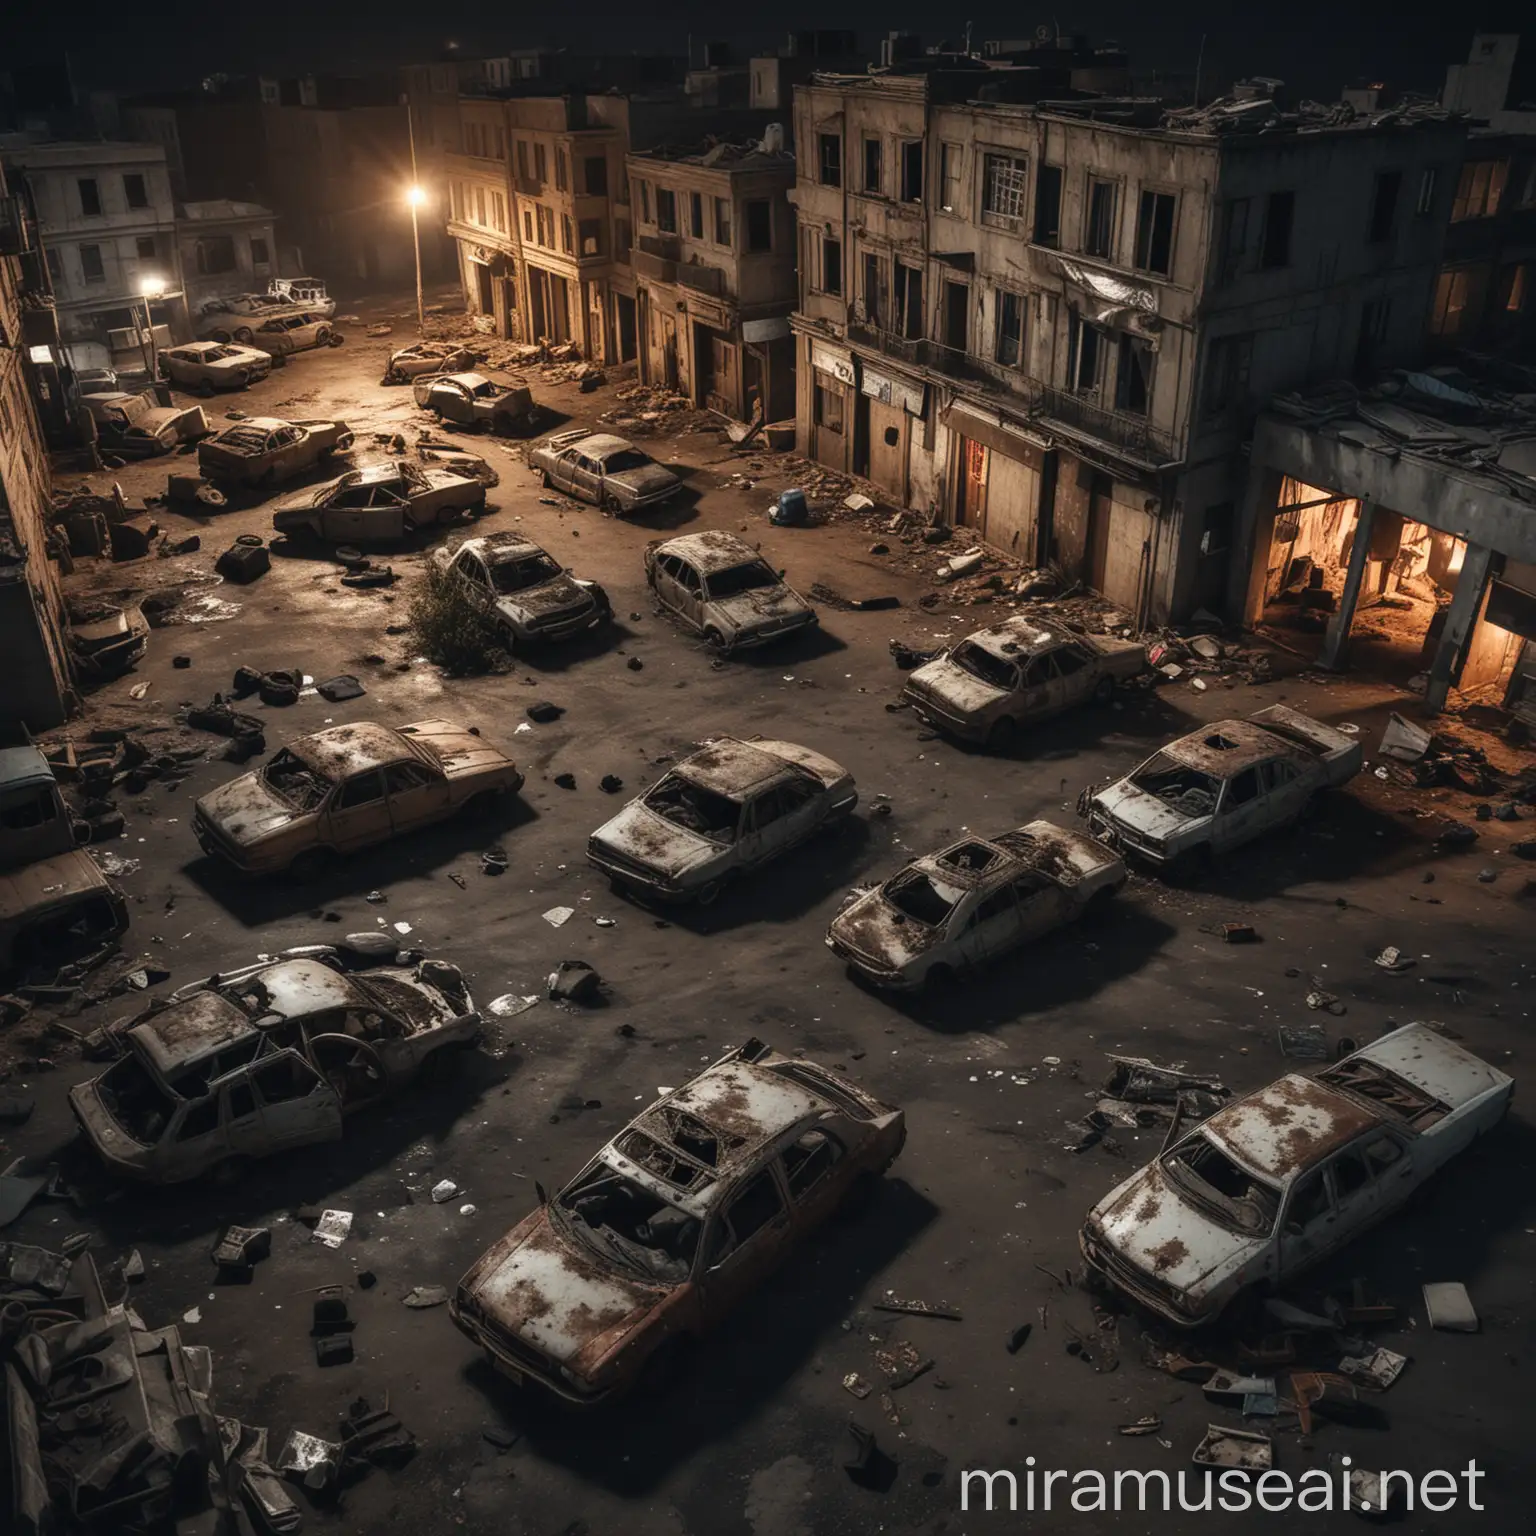 Desolate Cityscape Abandoned with Broken Cars and Bodies at Night